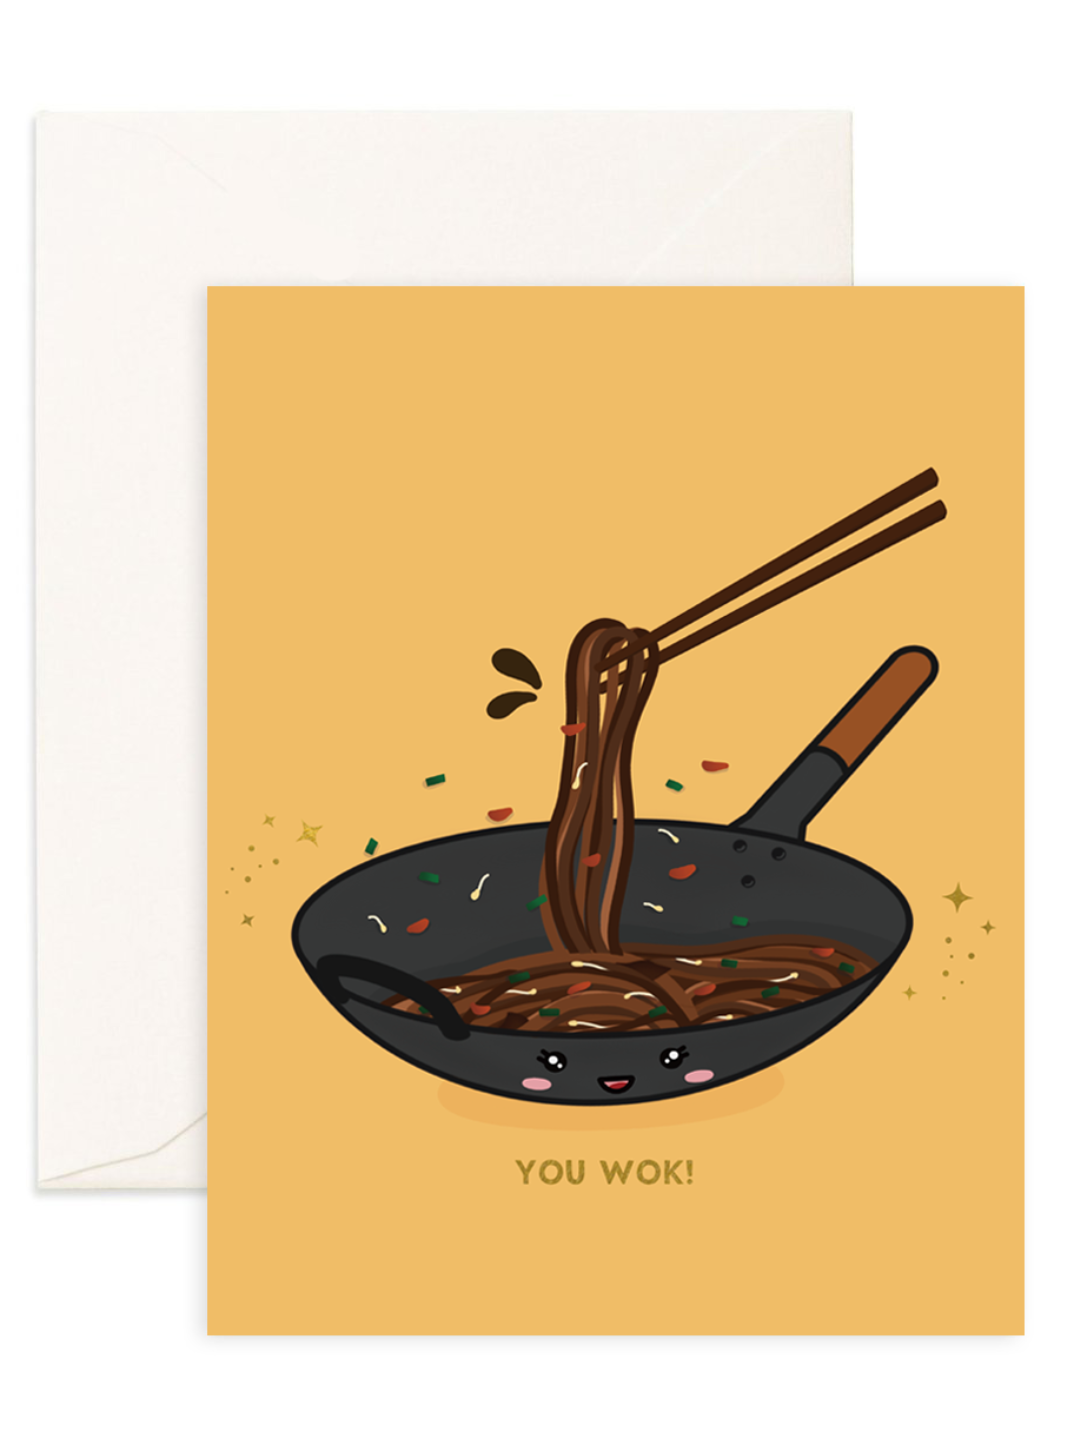 Hong Kong greeting card printed on recycled paper shop eco-friendly gift greeting card for friends really cute design for foodies